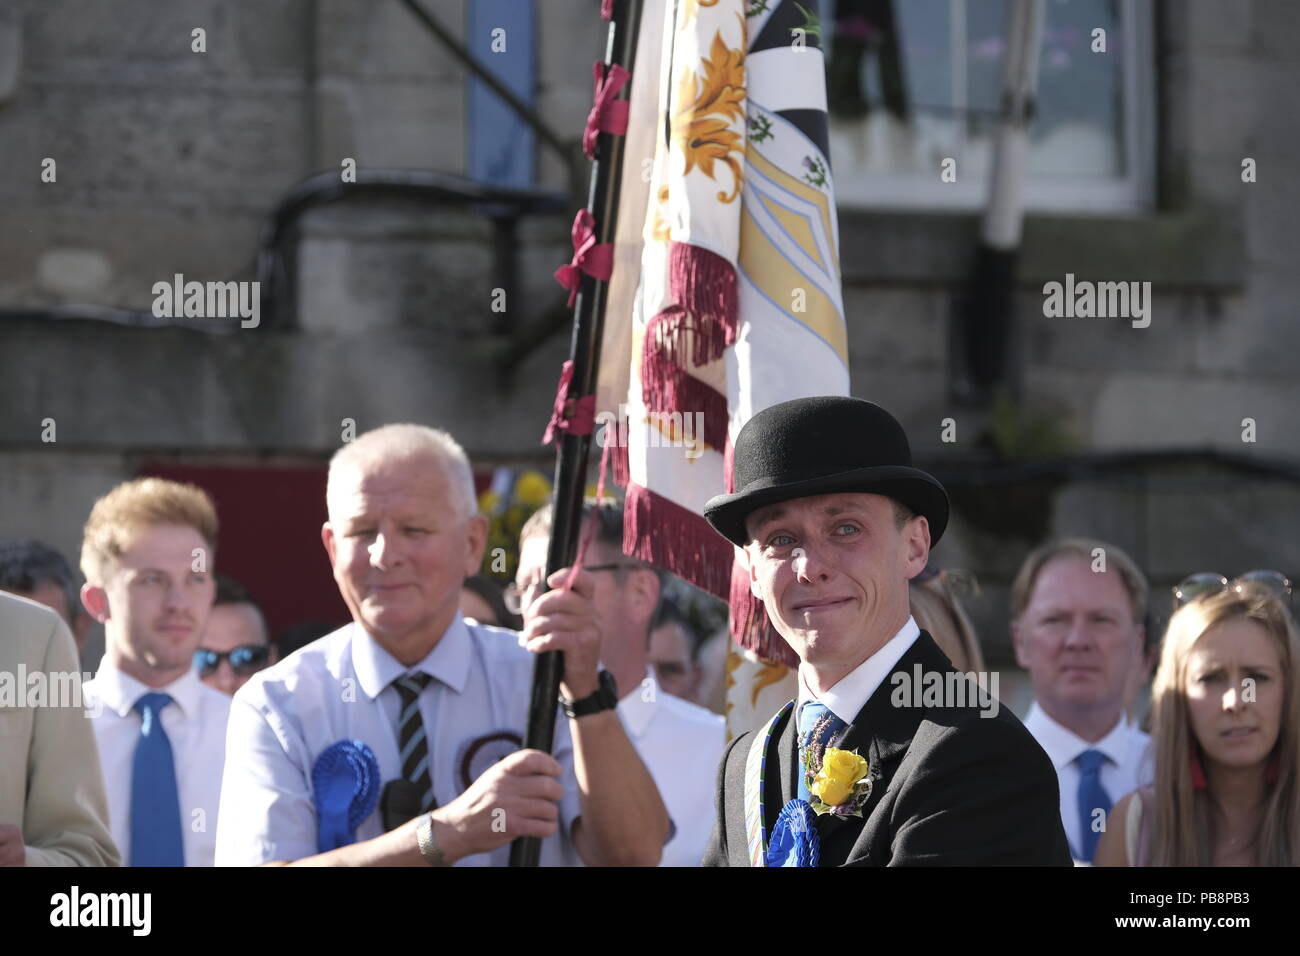 Langholm, Scotland, UK. 27th July, 2018.   Langholm Common Riding - 'Langholm's Great Day' Langholm Cornet Iain Little showing emotions prior to receiving the Towns Standard at the start of the days ceremonies in Langholm. 'The Muckle Toon' has seen tradition upheld for over 250 years with the Annual Langholm Common Riding which takes place every year on the last Friday in July, This year falling on Friday 27th.    Credit: Rob Gray/Alamy Live News Stock Photo